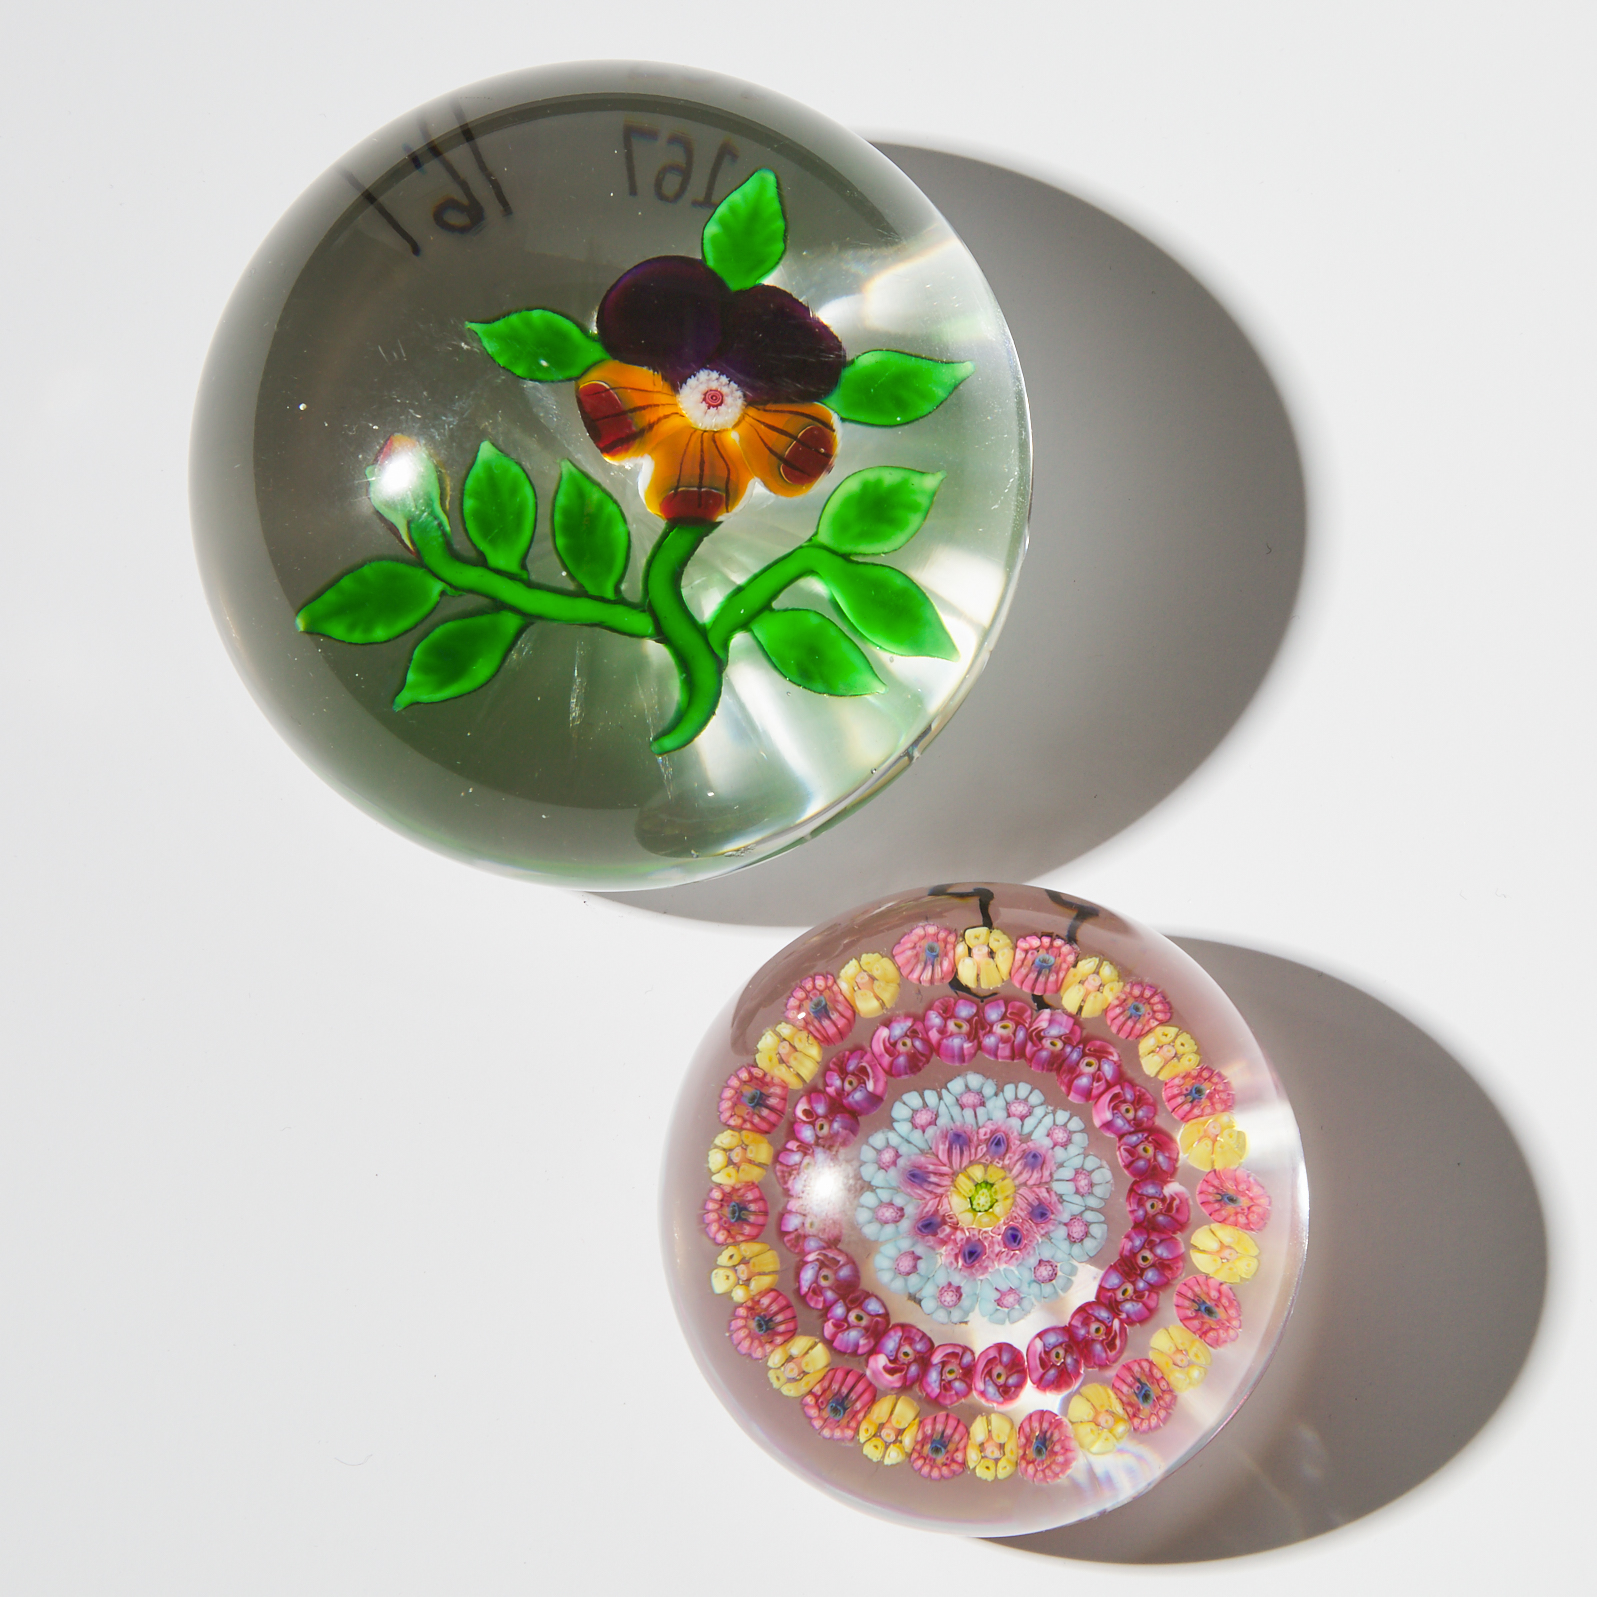 Baccarat Dupont Pansy and Concentric Millefiori Glass Paperweights, c.1930-50